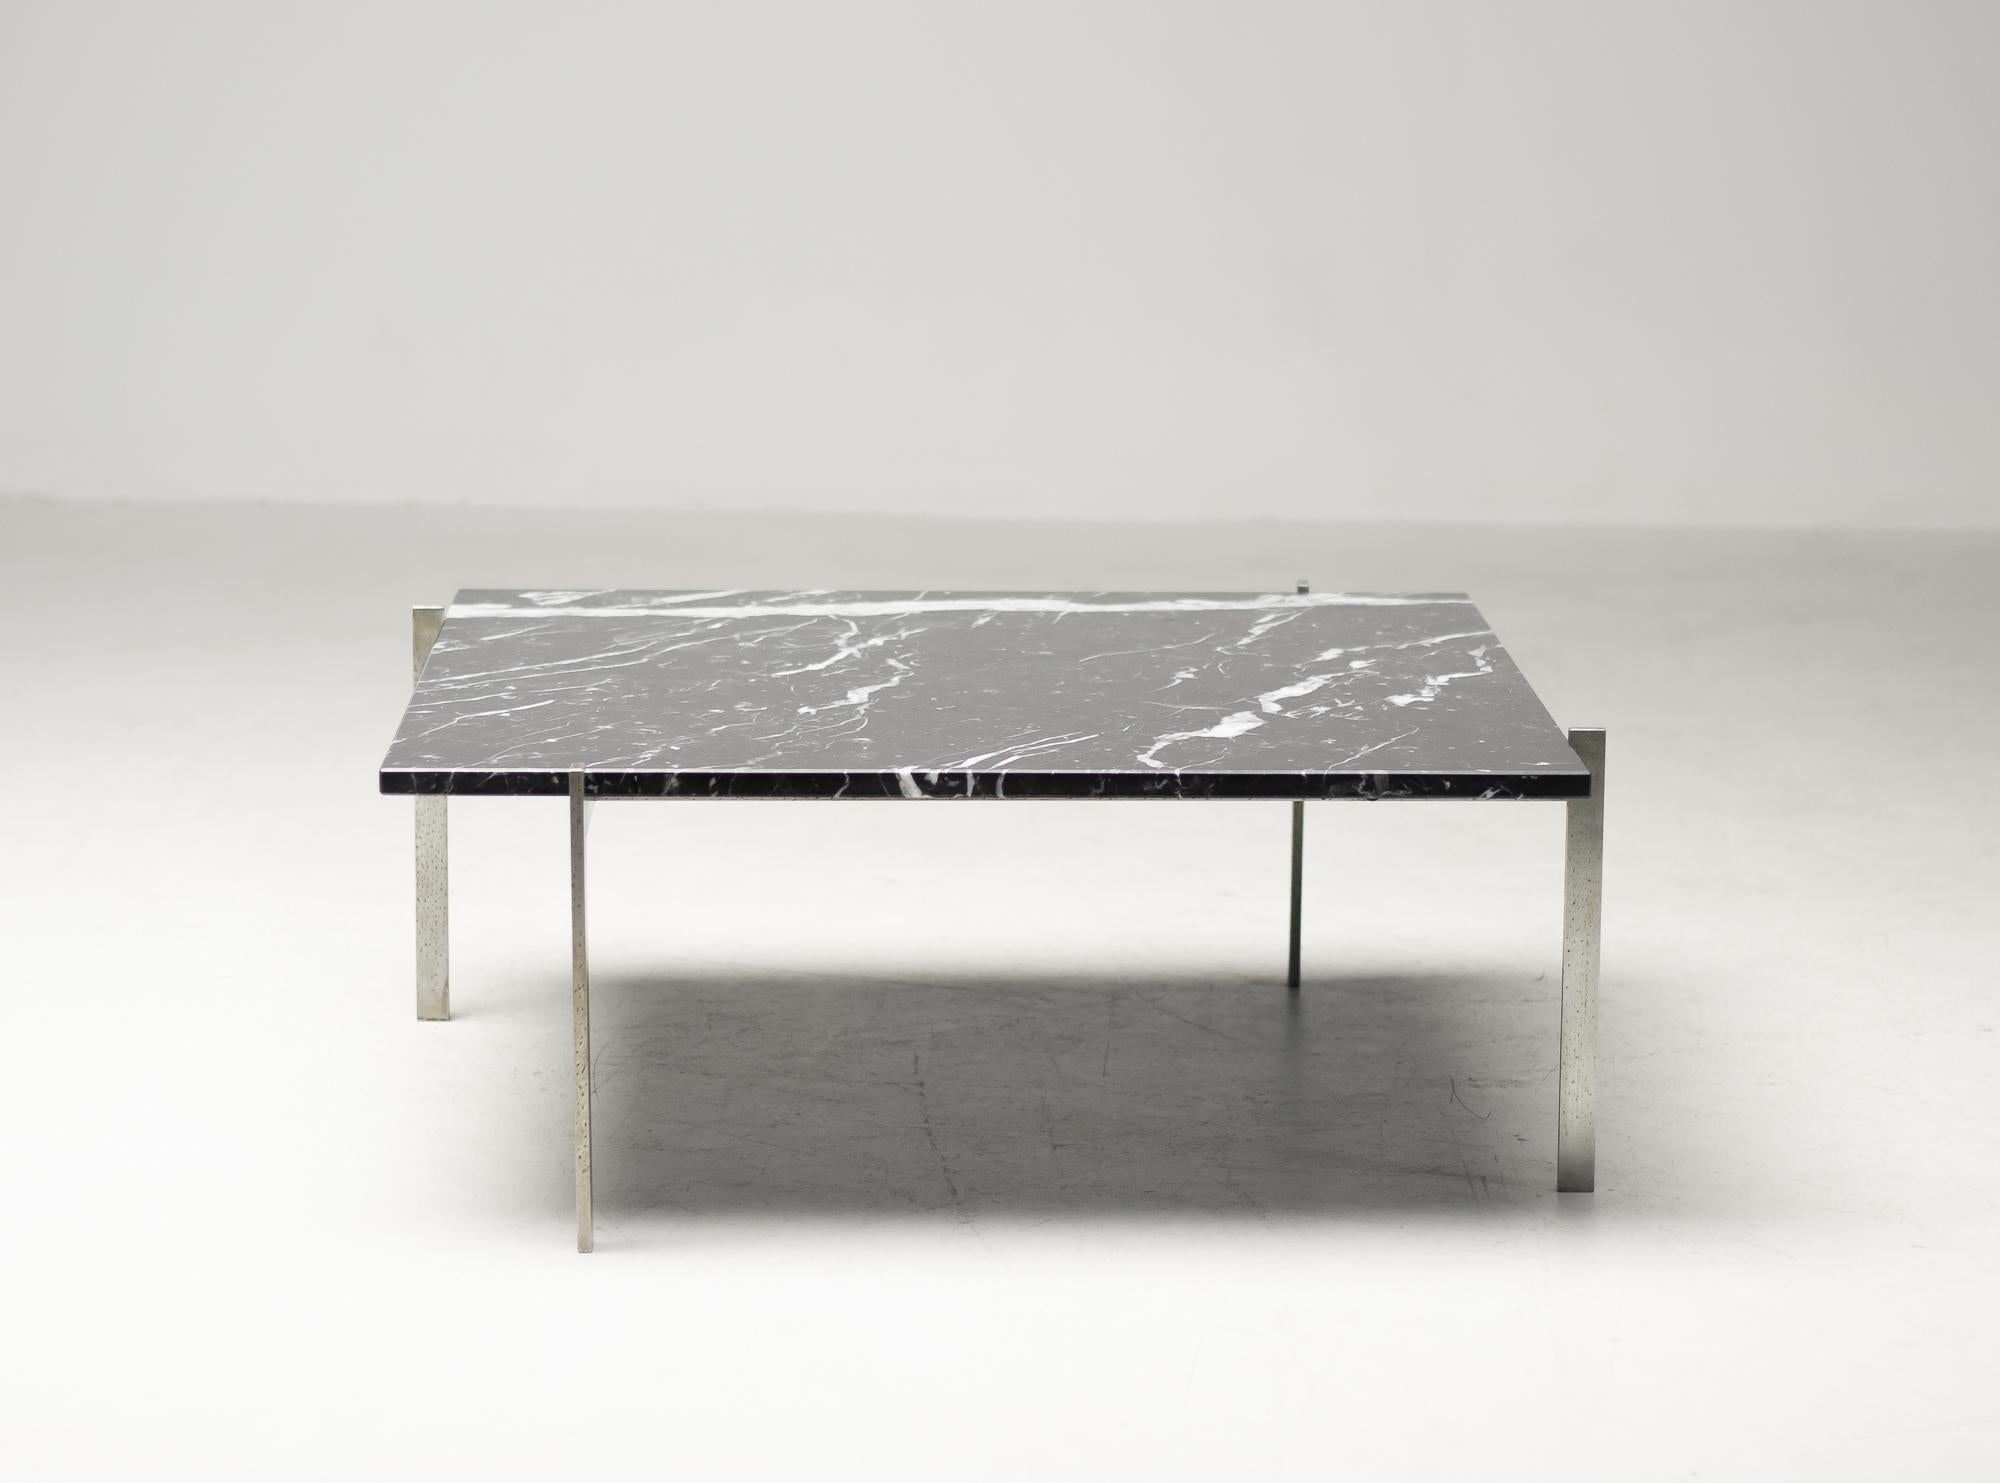 Poul Kjærholm for E. Kold Christensen, black marble and metal, Denmark, design 1955. 

This table by Kjærholm is the epitome of minimalistic yet monumental design. The 'swastika' shaped steel frame holds a beautiful worn black marble top. With